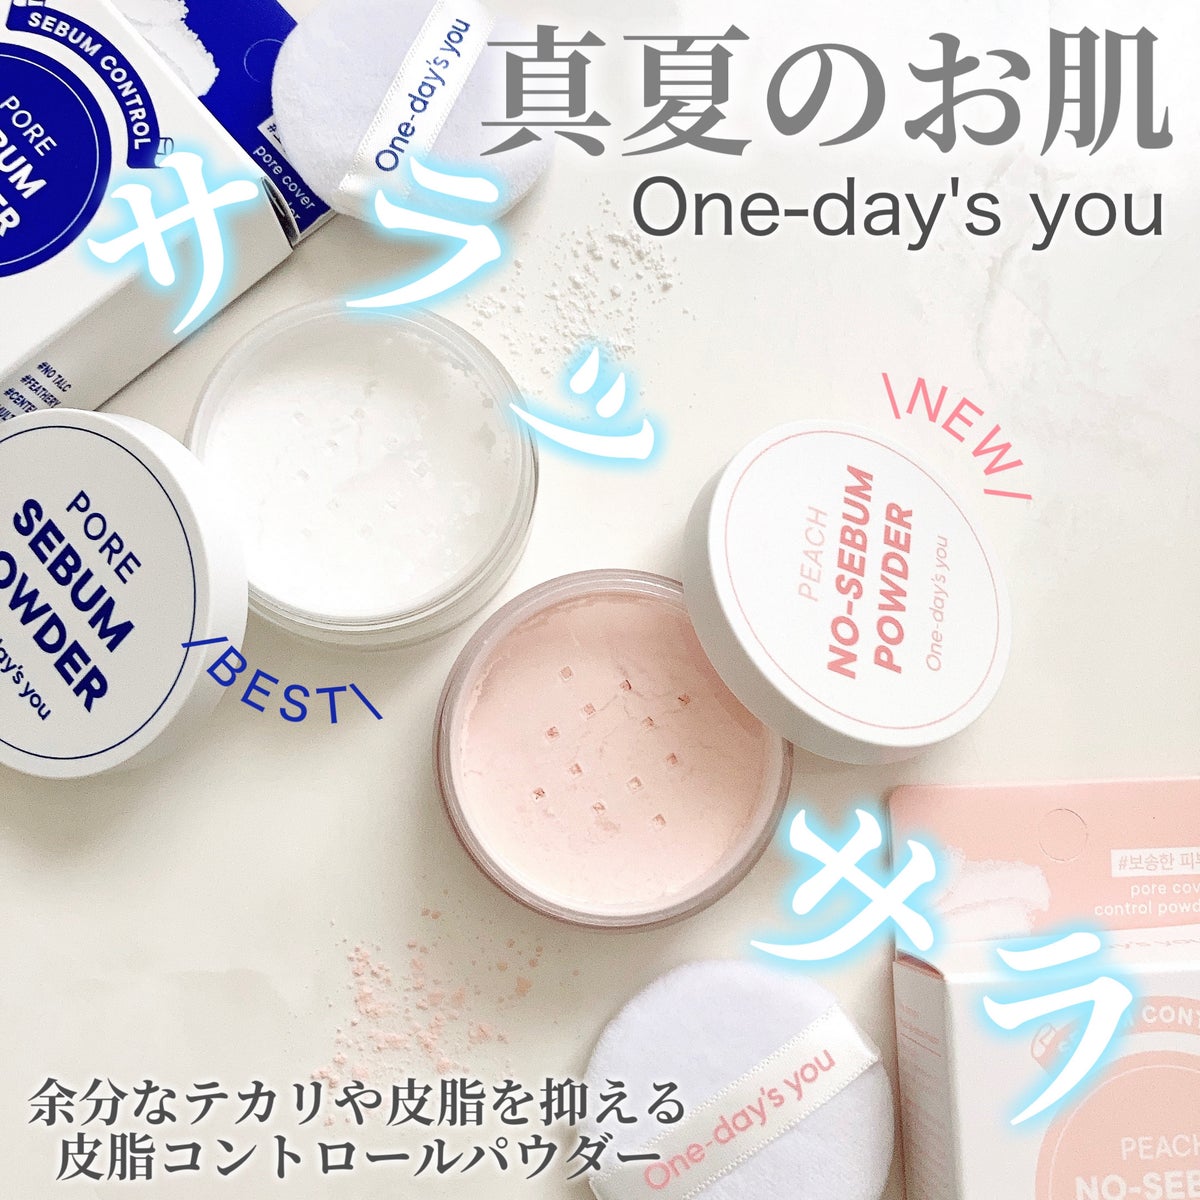 One-day's youのフェイスパウダーを徹底比較】ポアセバムパウダー